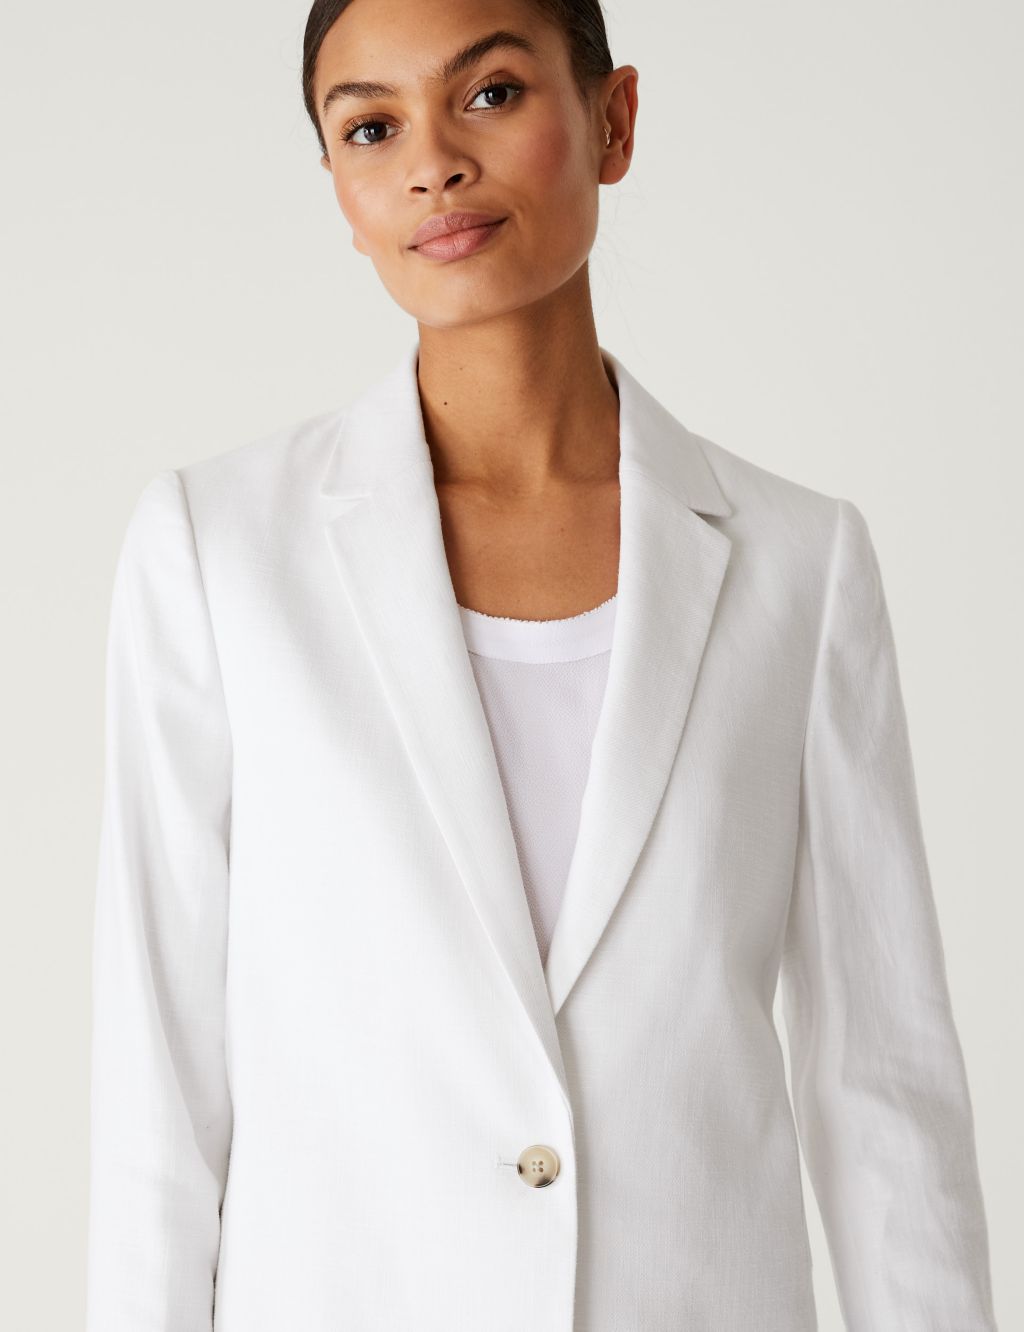 Linen Blend Tailored Cropped Blazer image 3